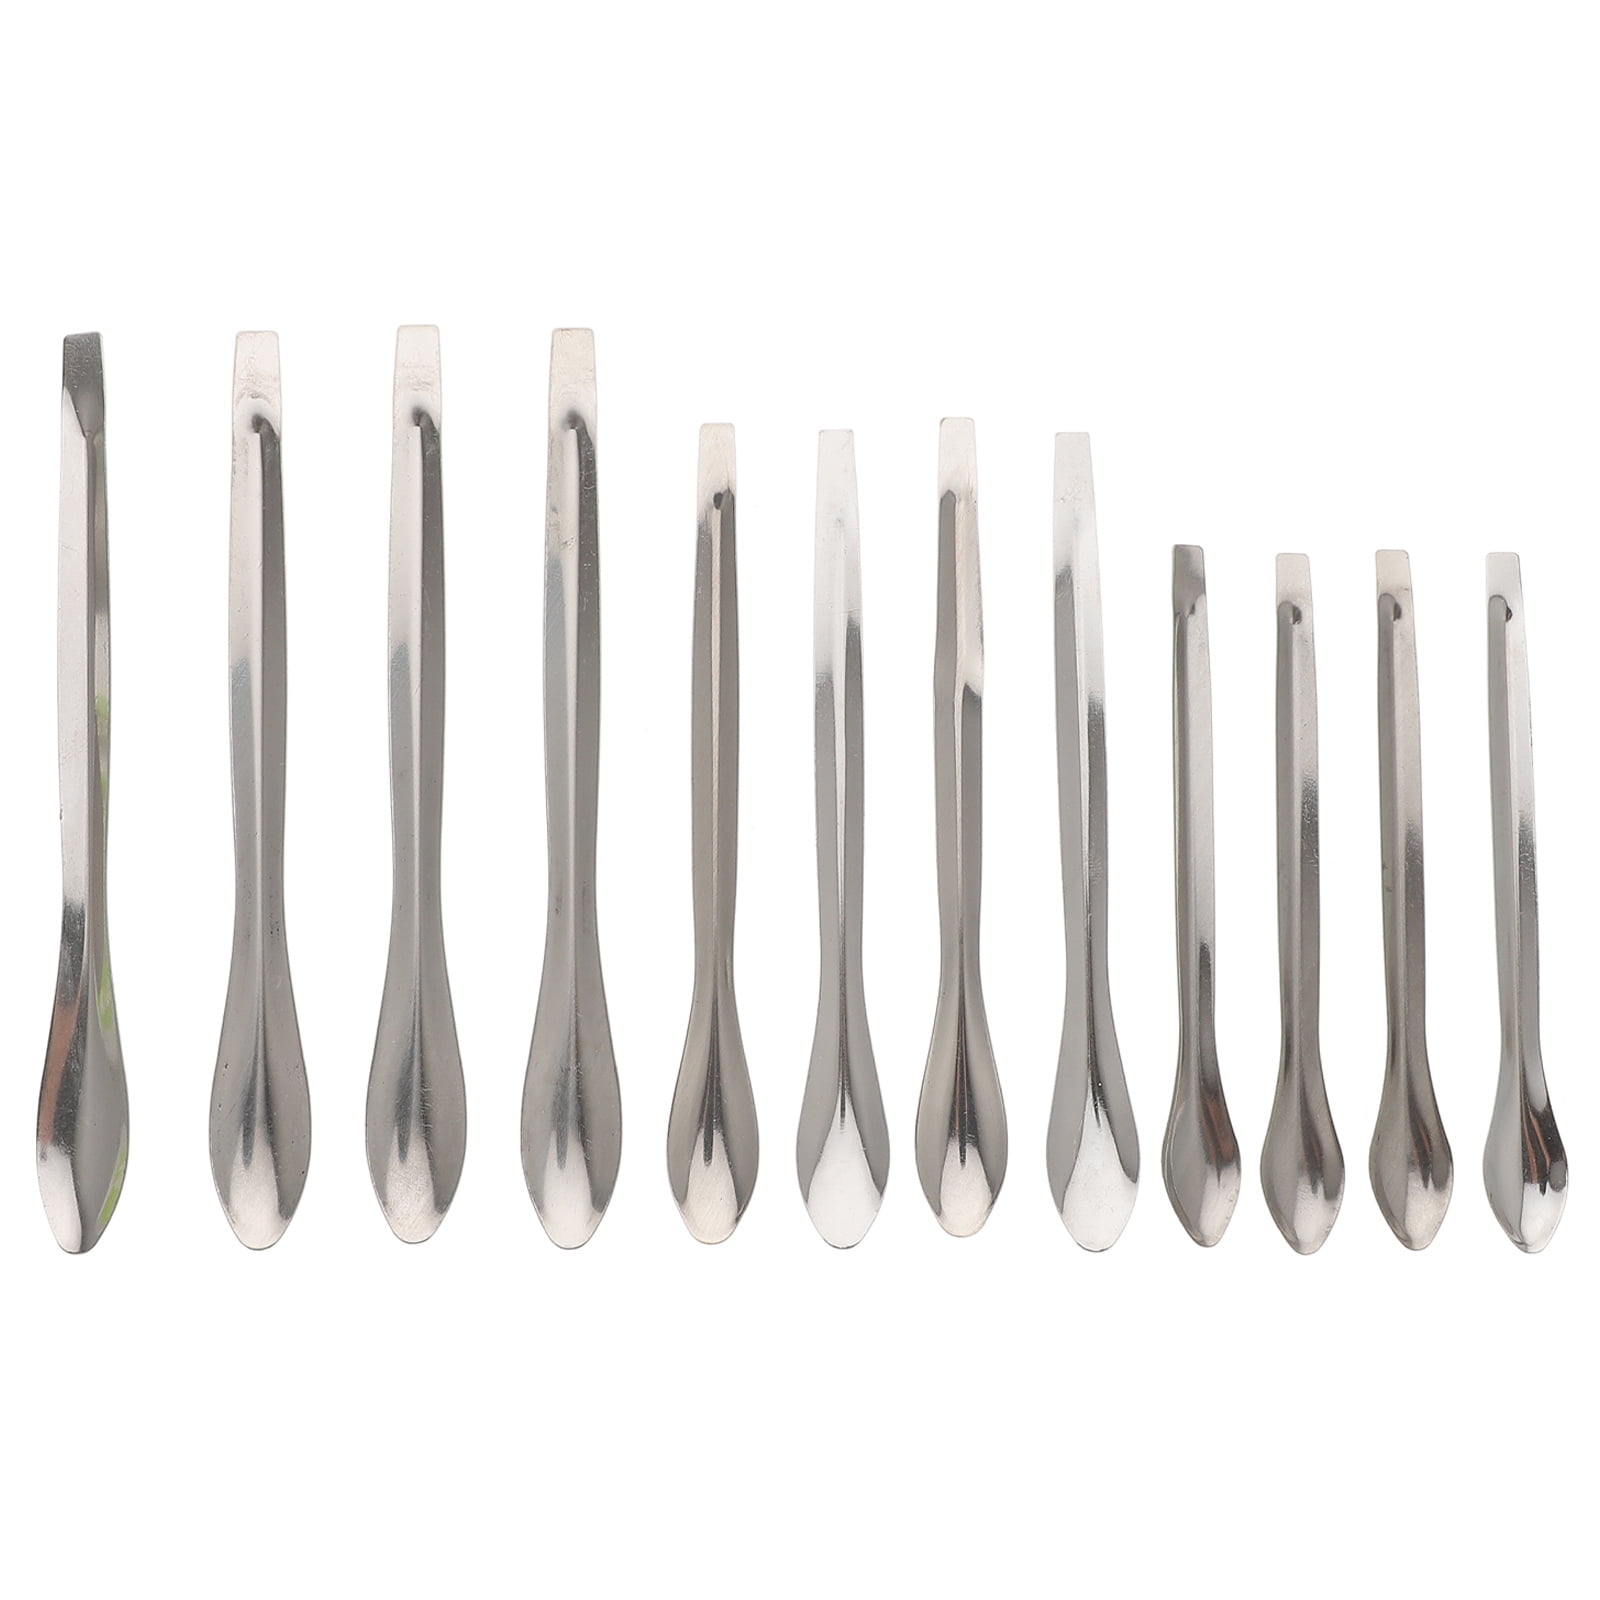 Lab Spatula Stainless Steel 15 PCS Lab Spoon Micro-Scoop Laboratory Tiny  Spoon for Reagent Sampling Mixing